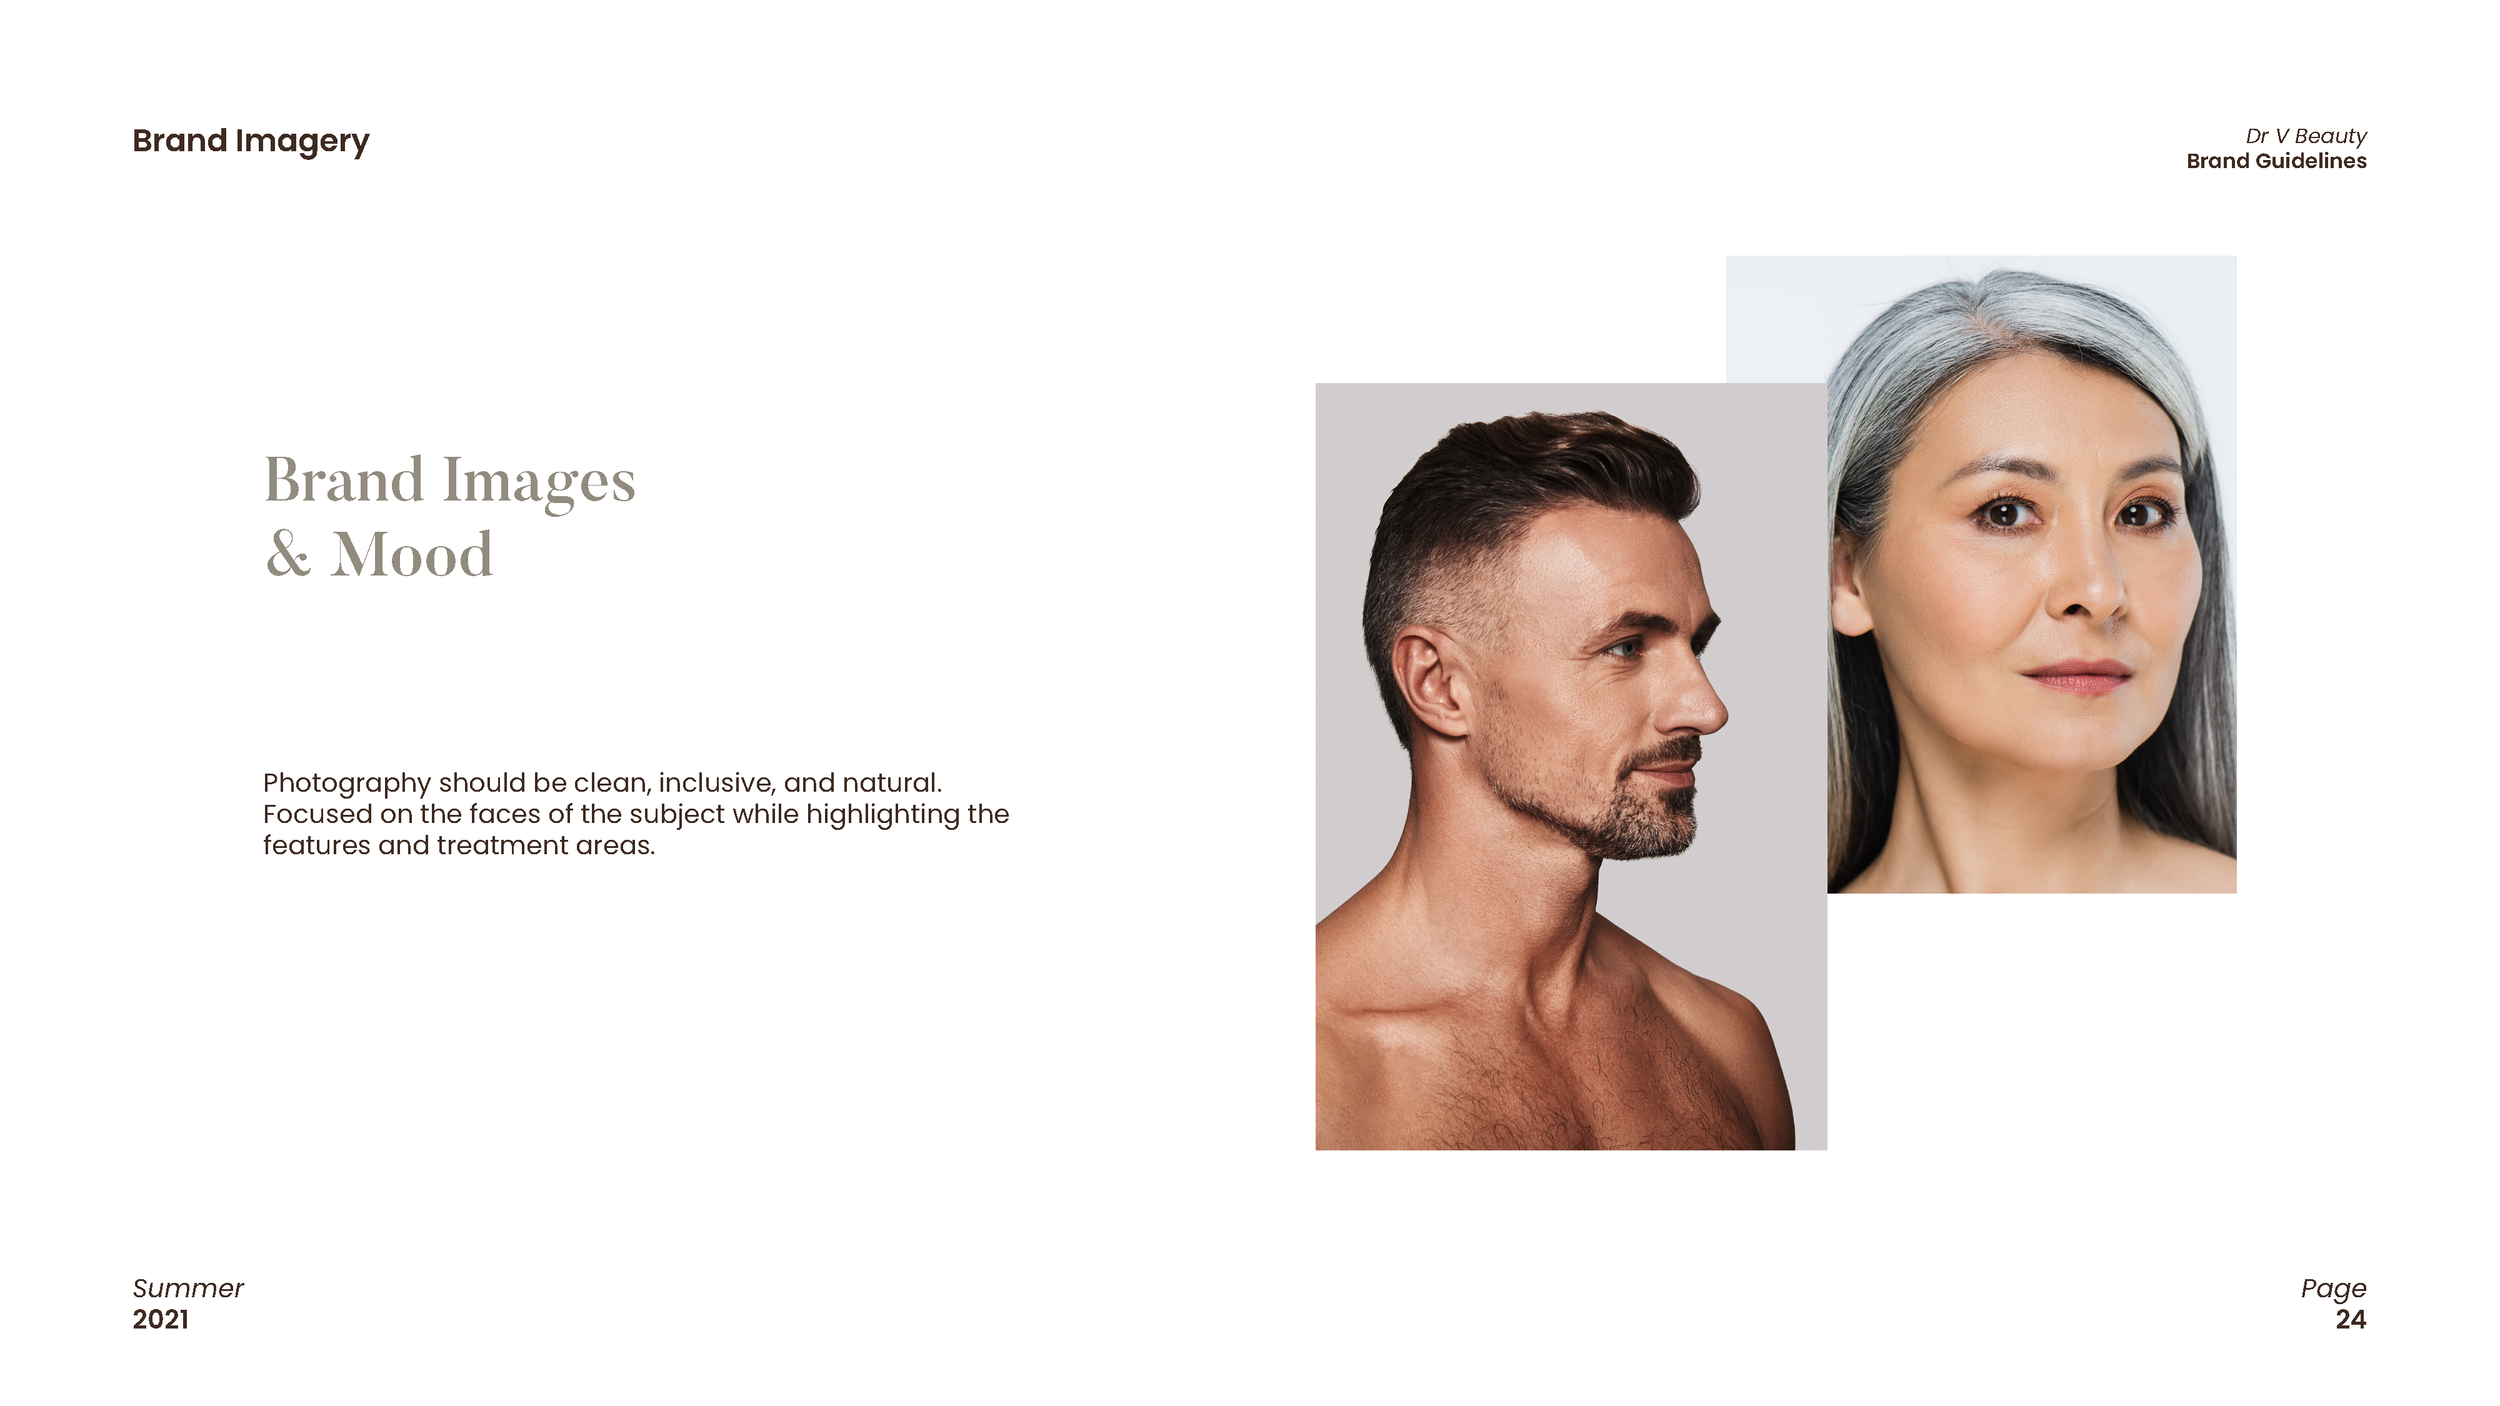 Dr V Beauty - Brand Guidelines_Page_24.png